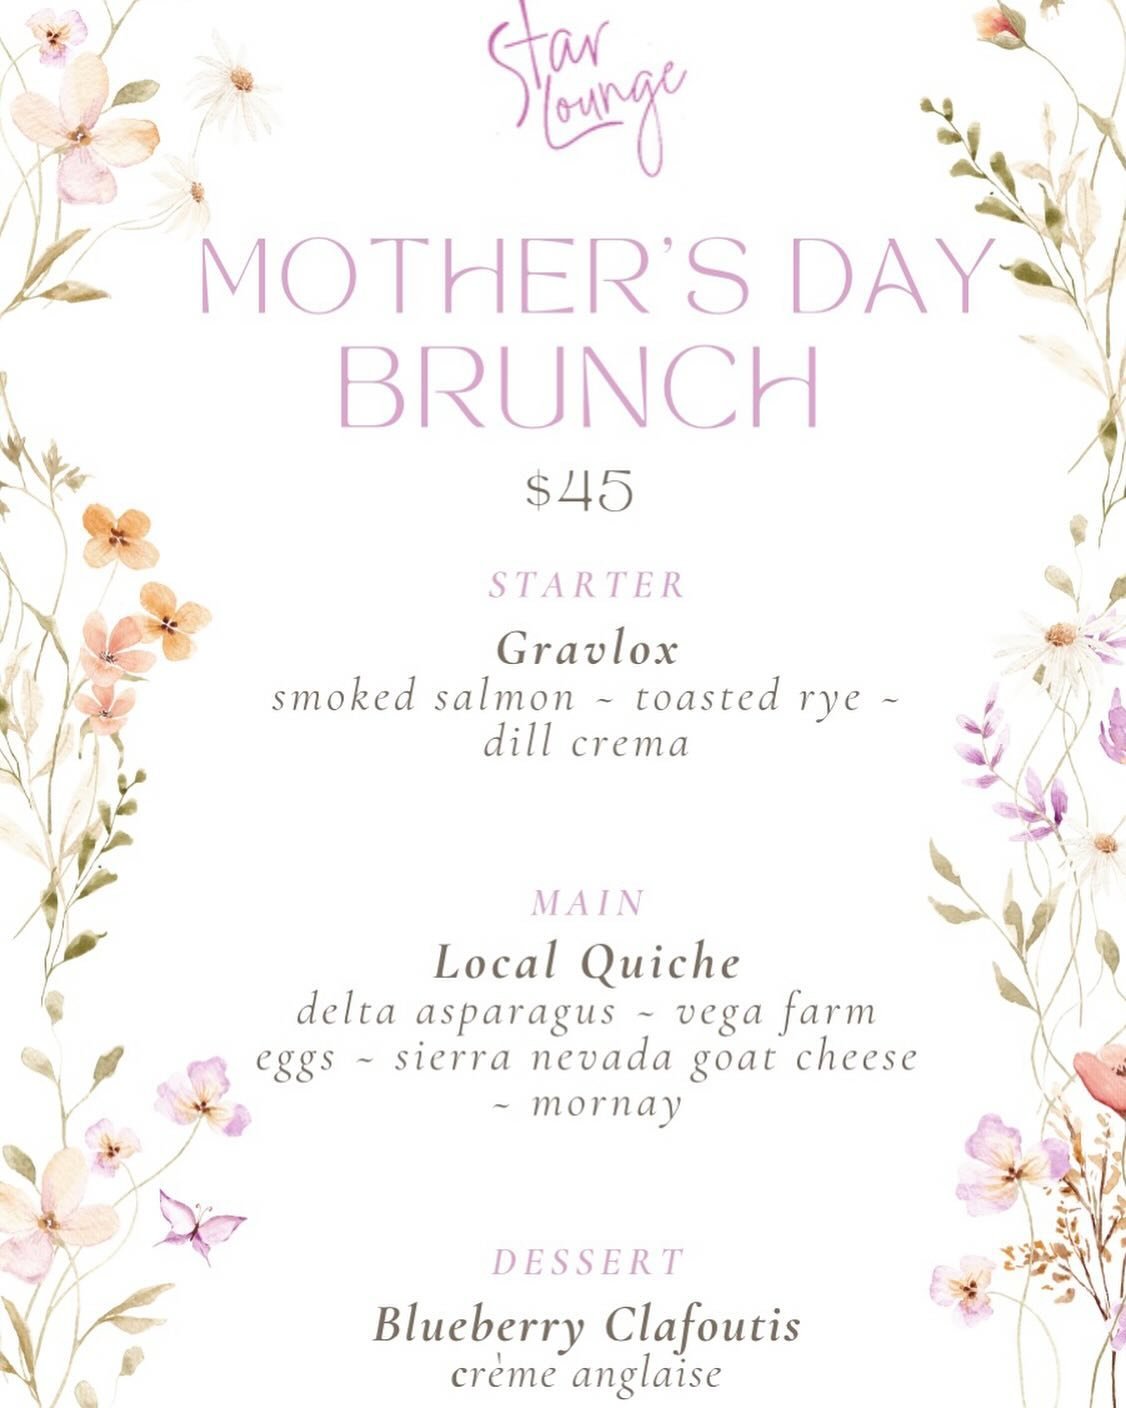 Celebrate Mother&rsquo;s Day at the Star Lounge with a special three course brunch! 🥂💐
Reservations now open. Link in bio.

#historicstarlounge #mothersday #brunch #sacramentoevents #mothersdaygiftideas #starloungesacramento #hyatthouse